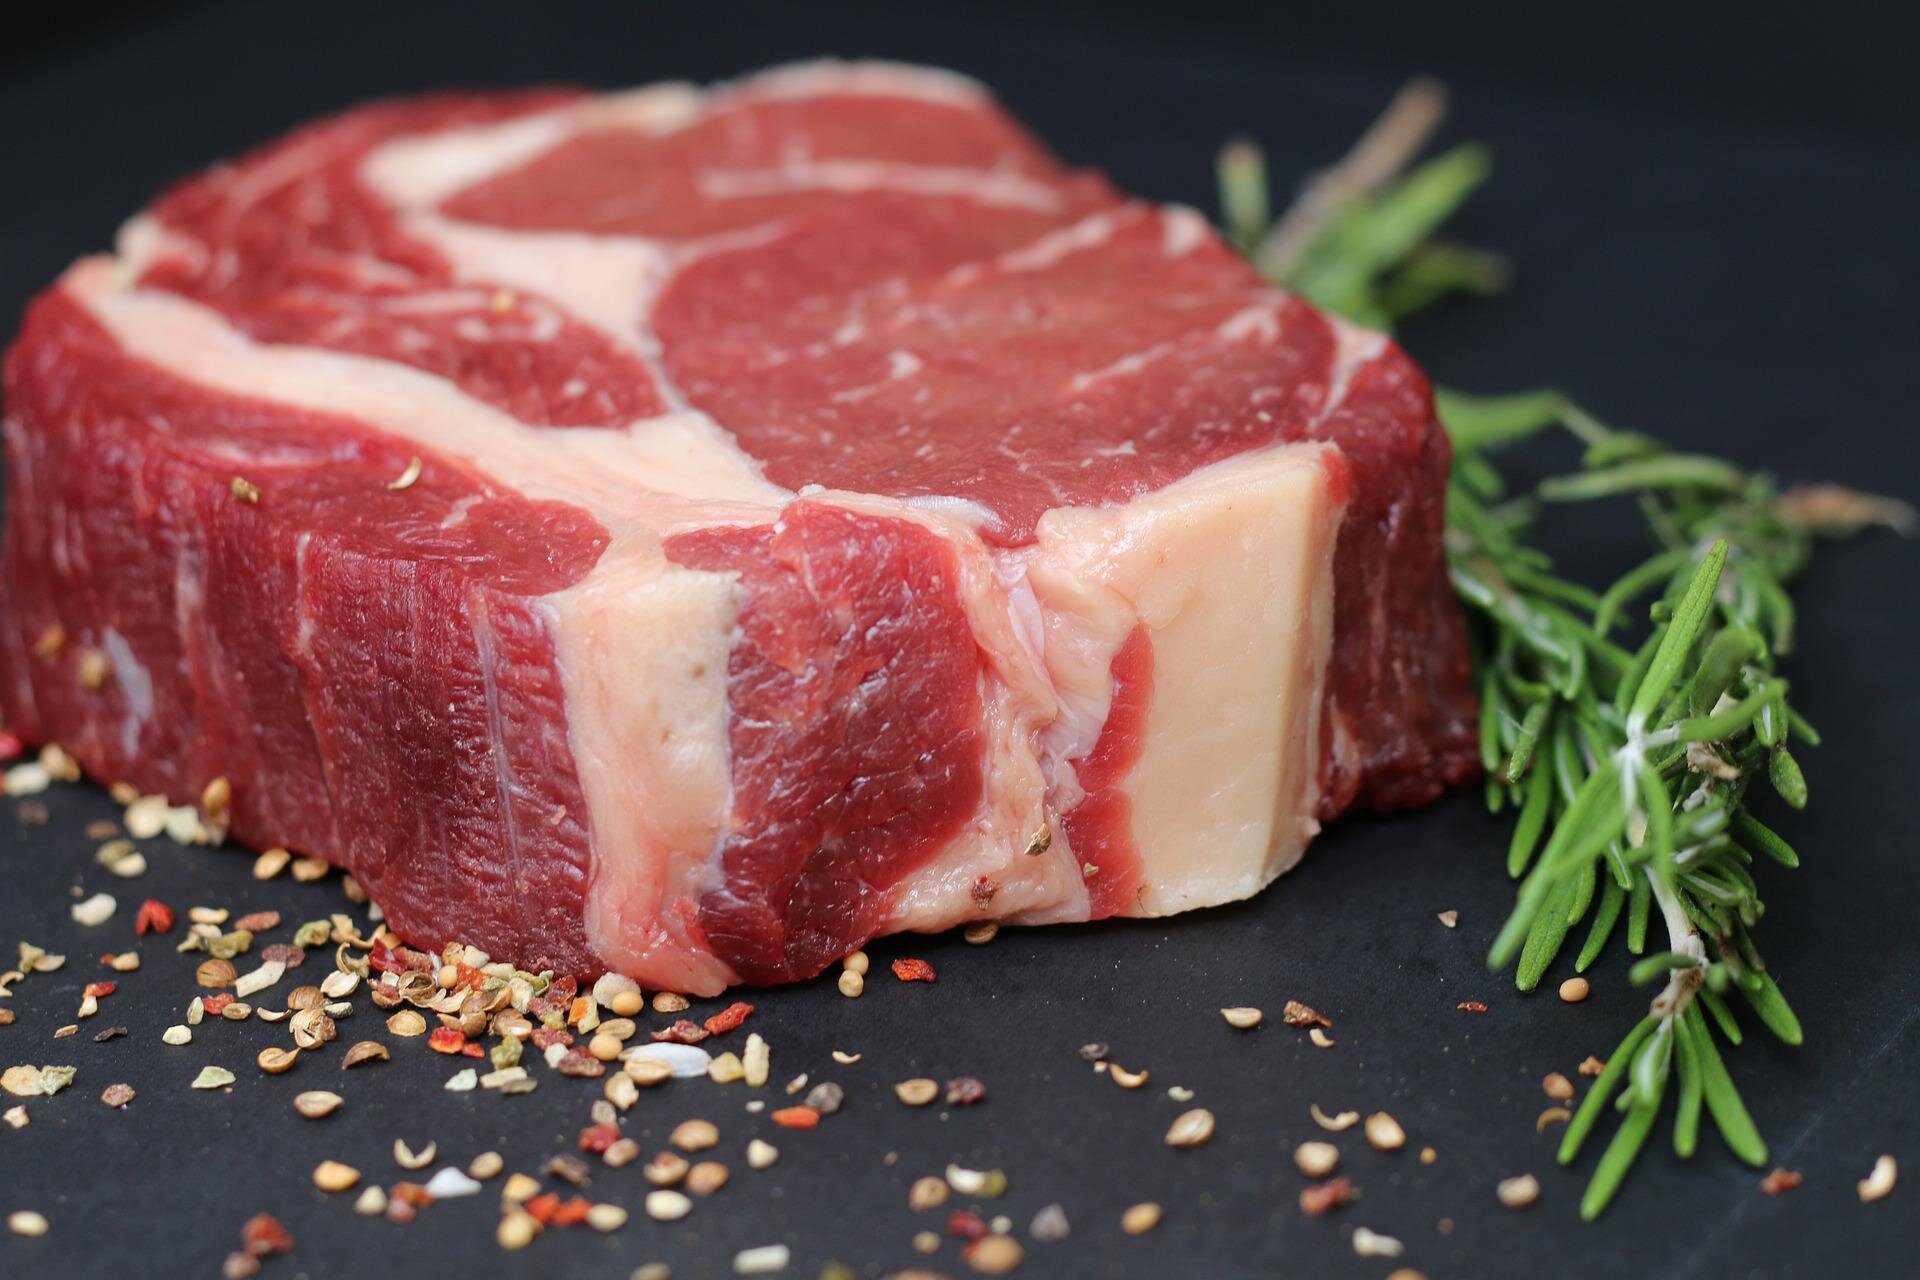 #How bad is red meat for you? Health risks get star ratings